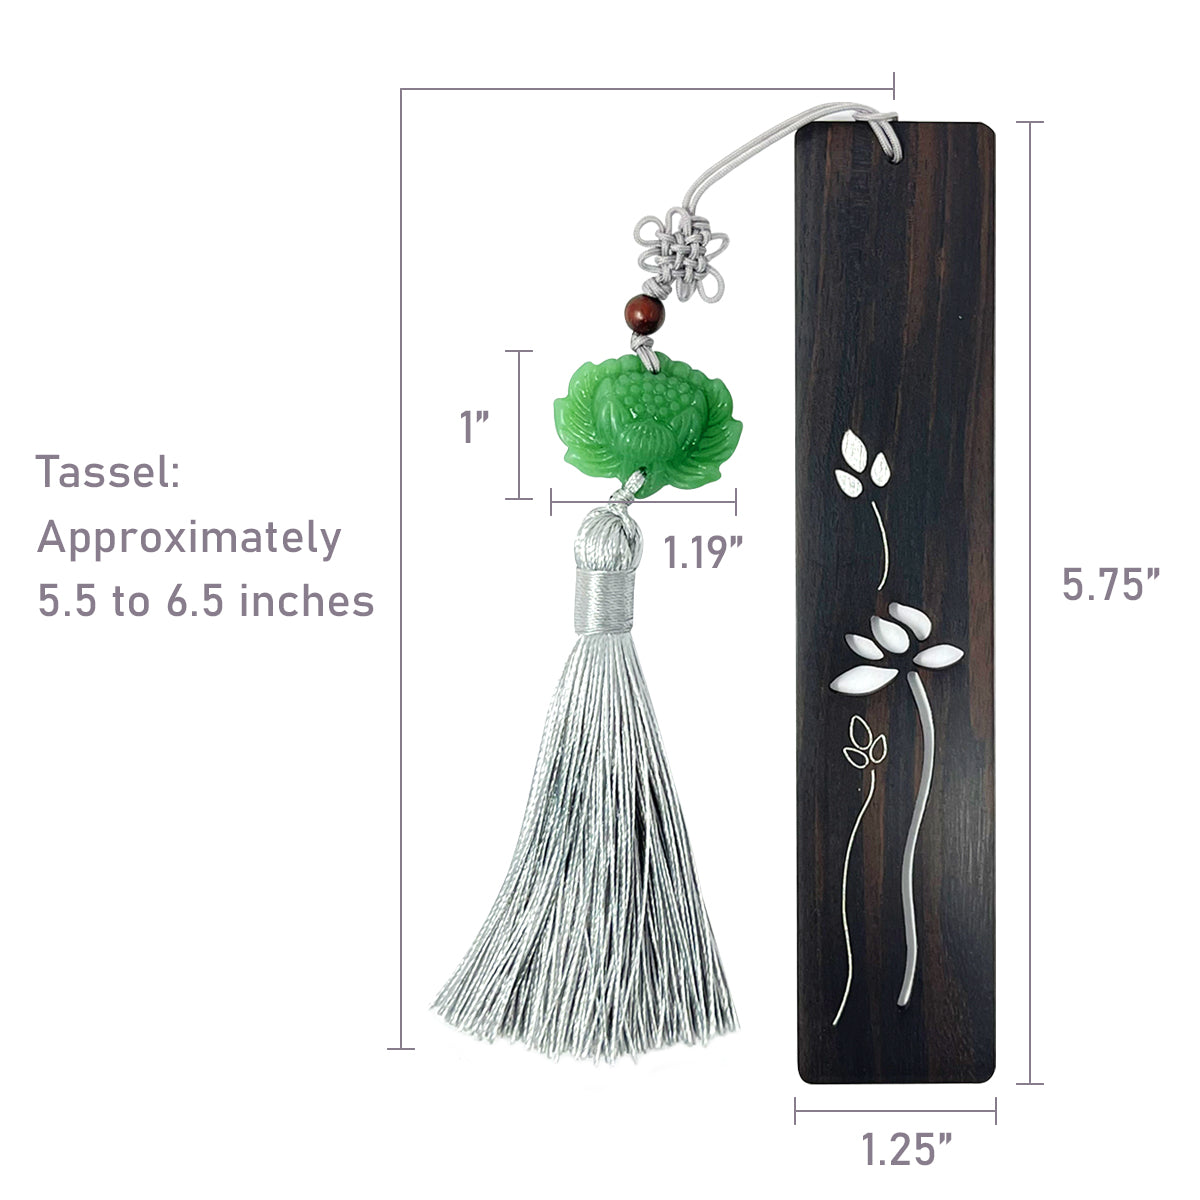 Wrapables Sandalwood Bookmark with Pendant Tassel for Book Lovers and Readers